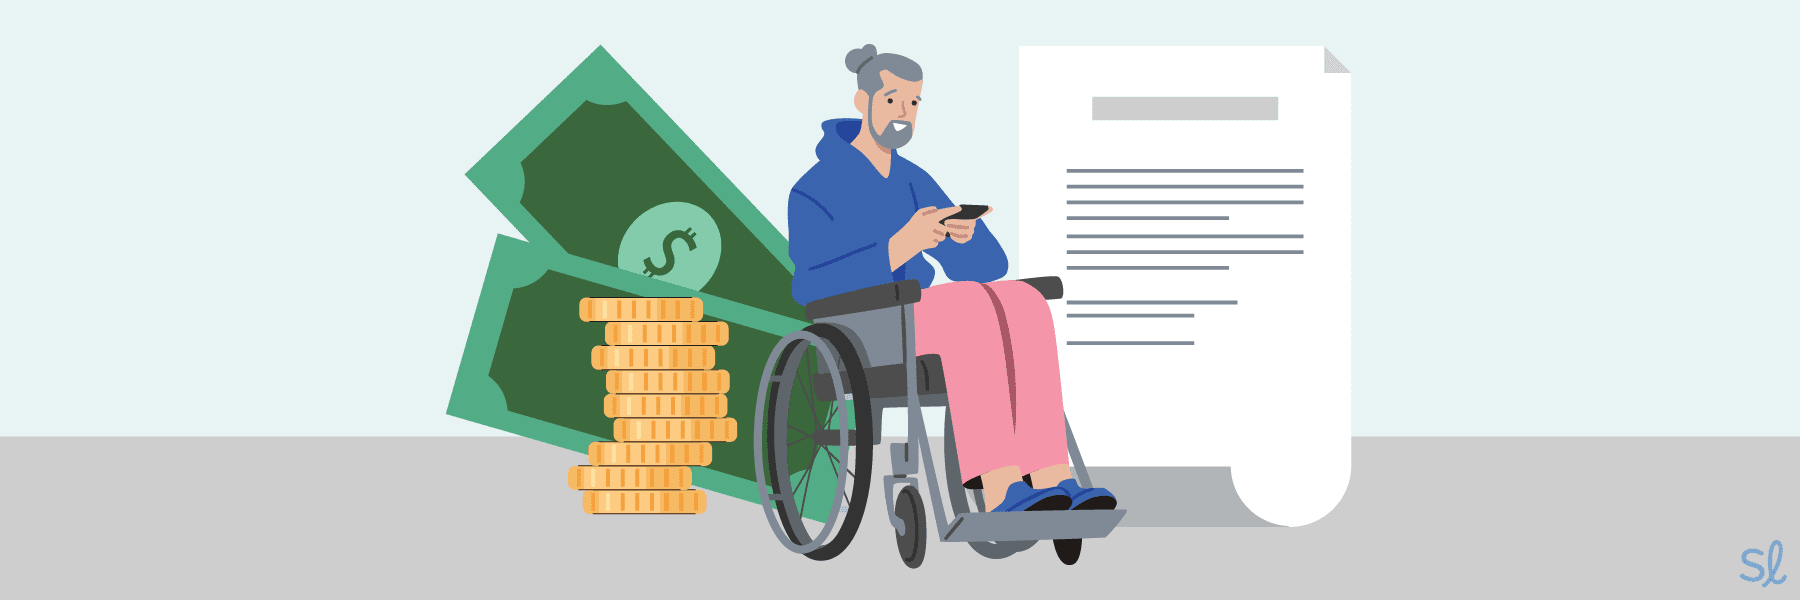 Person in wheelchair using cell phone. Green bills and coins and a white document in background.